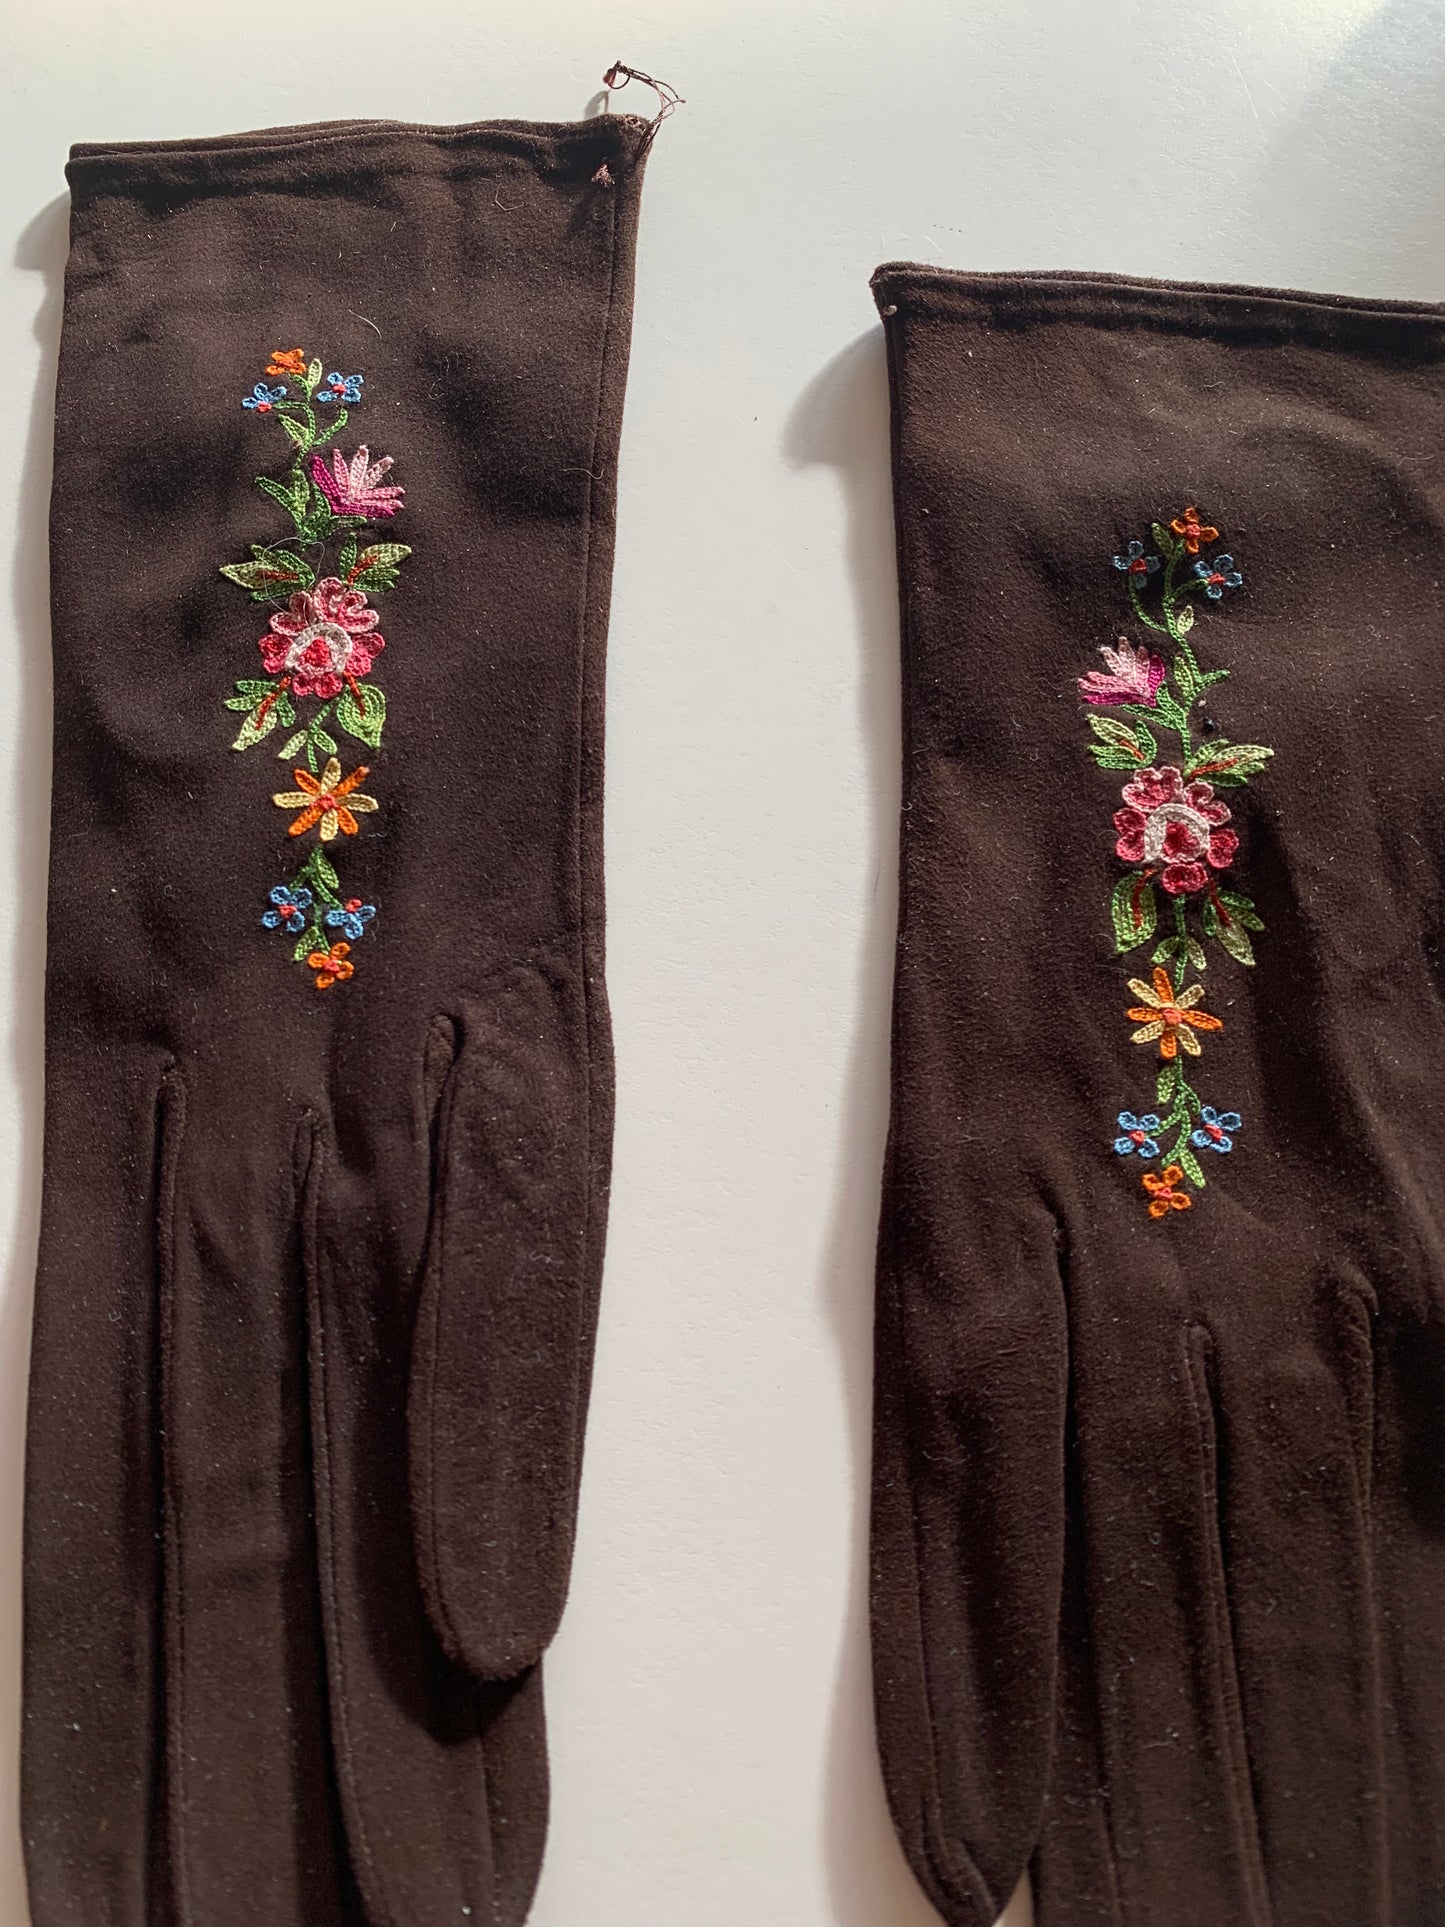 Cocoa Floral n Embroidered Leather Gloves circa 1950s